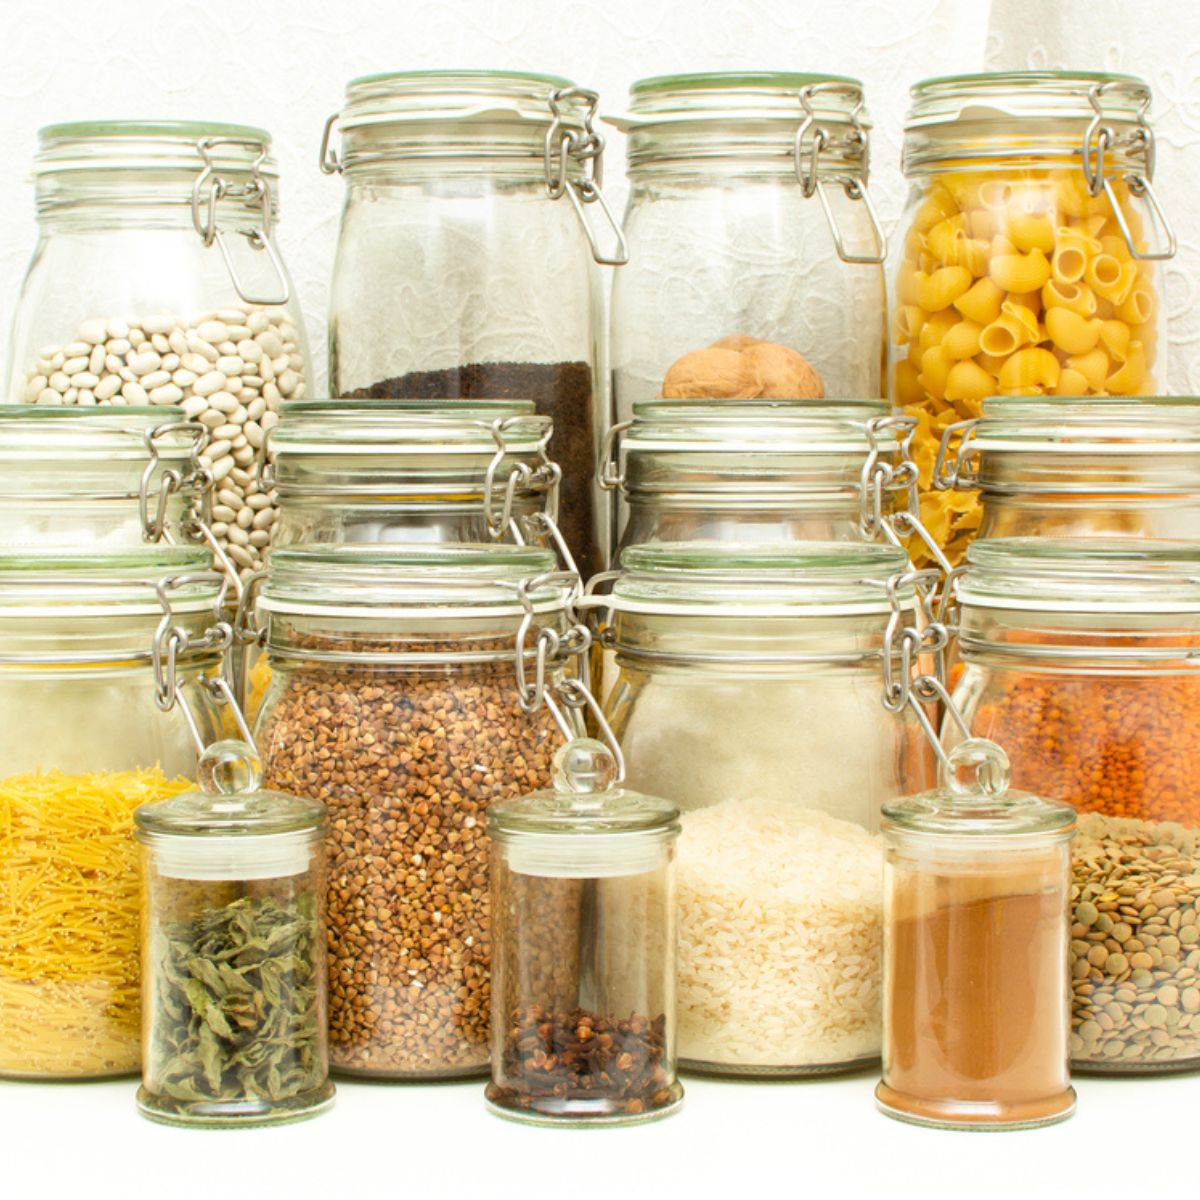 Jars of pantry staple items ideal for small budgets. Beans, pasta, spices, rice